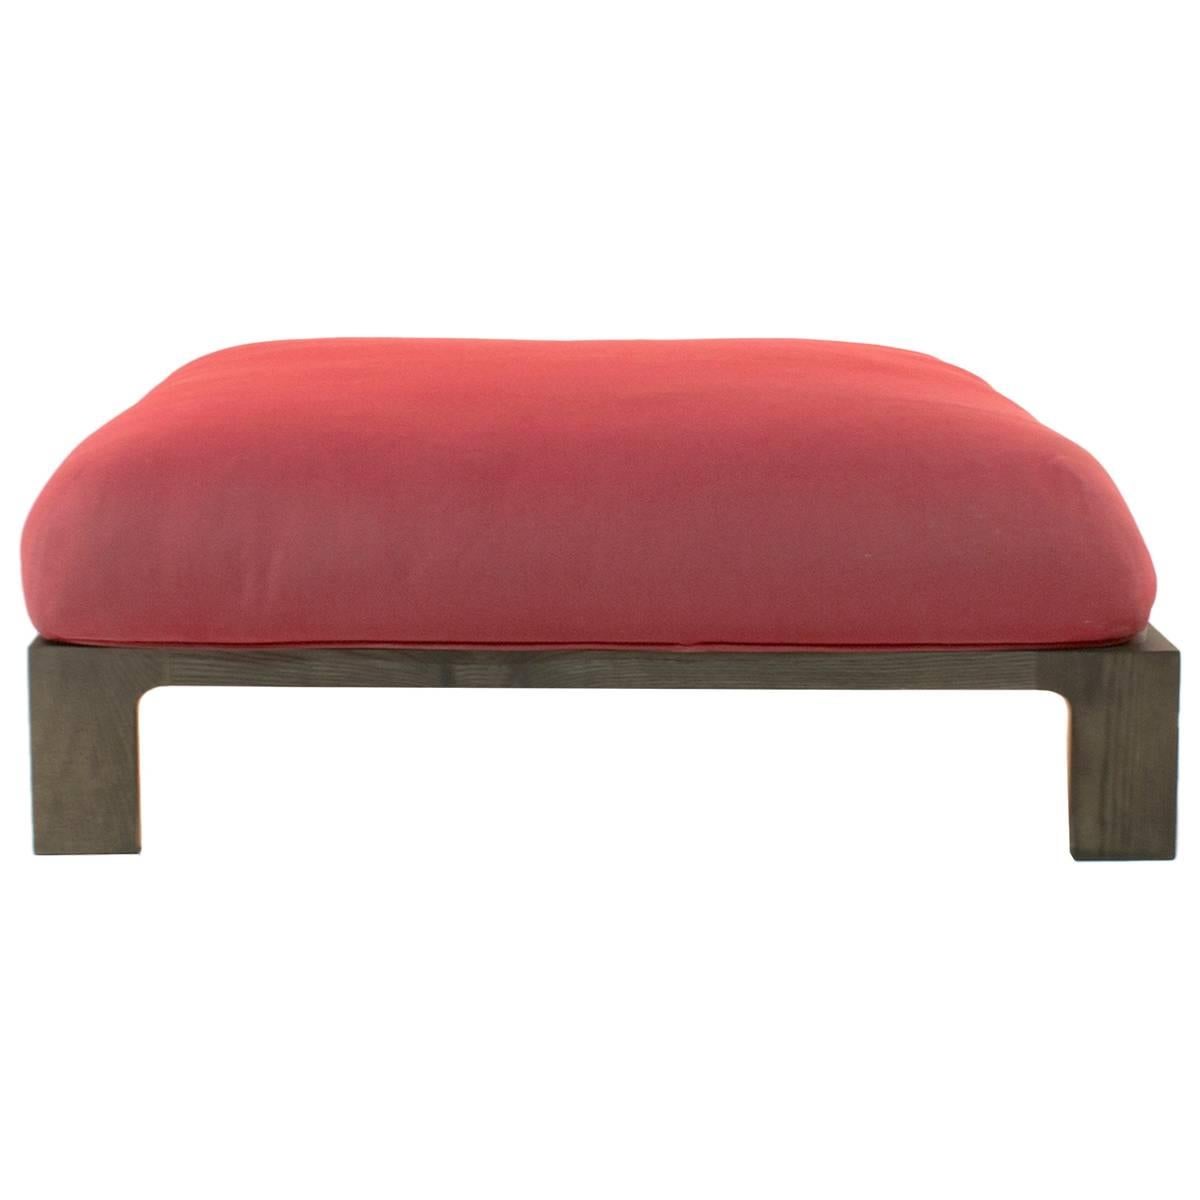 Red Moroso Fergana Pouf Ottoman Element by Patricia Urquiola, Italy For Sale